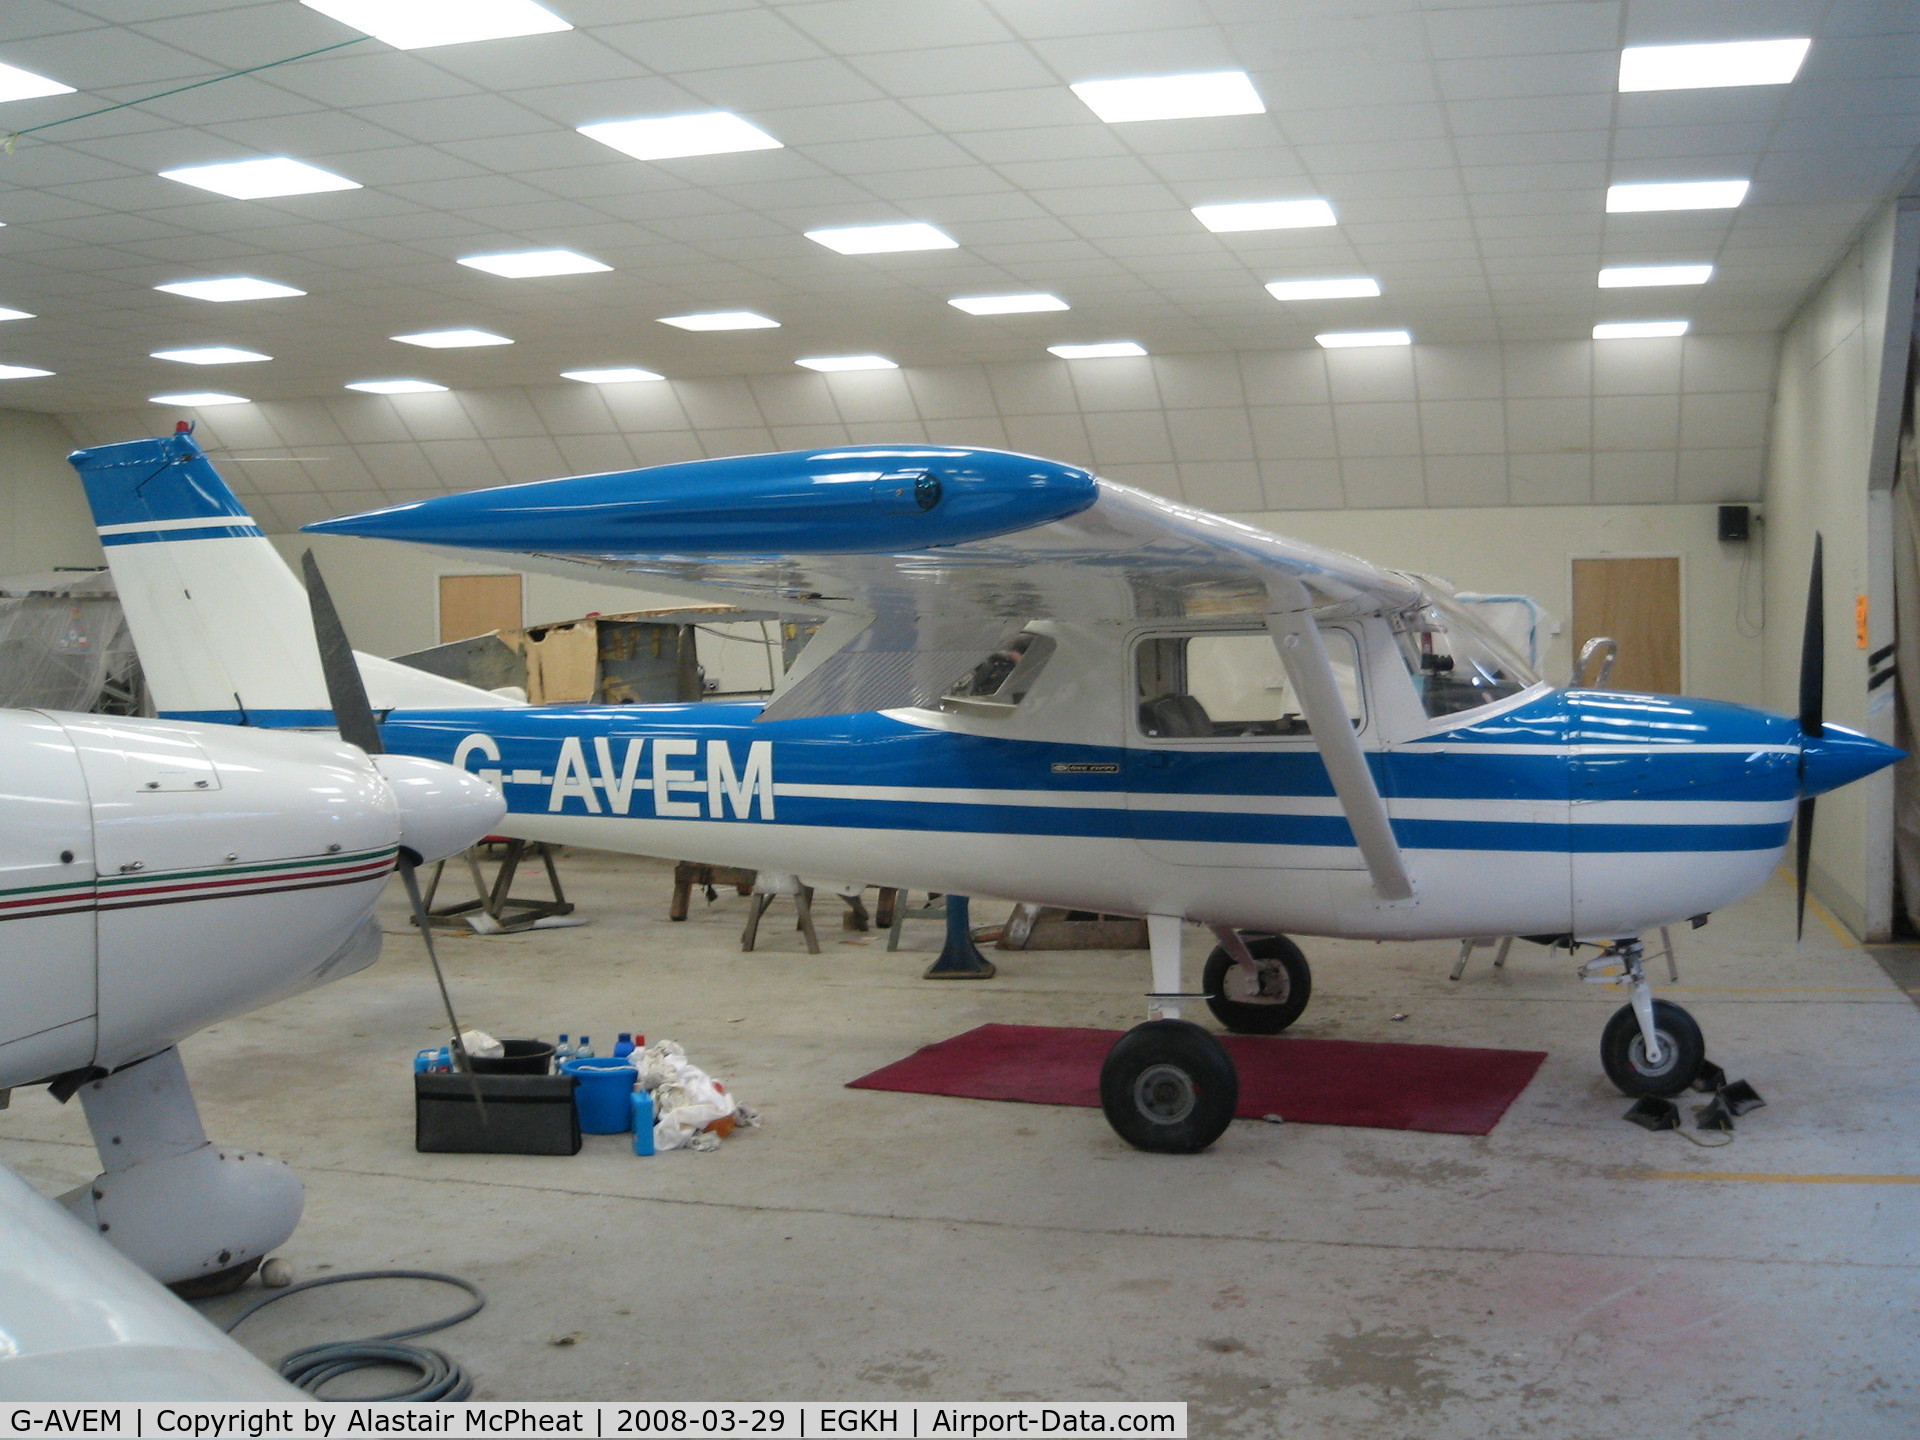 G-AVEM, 1966 Reims F150G C/N 0198, In the hanger nearly finished re-furbishment